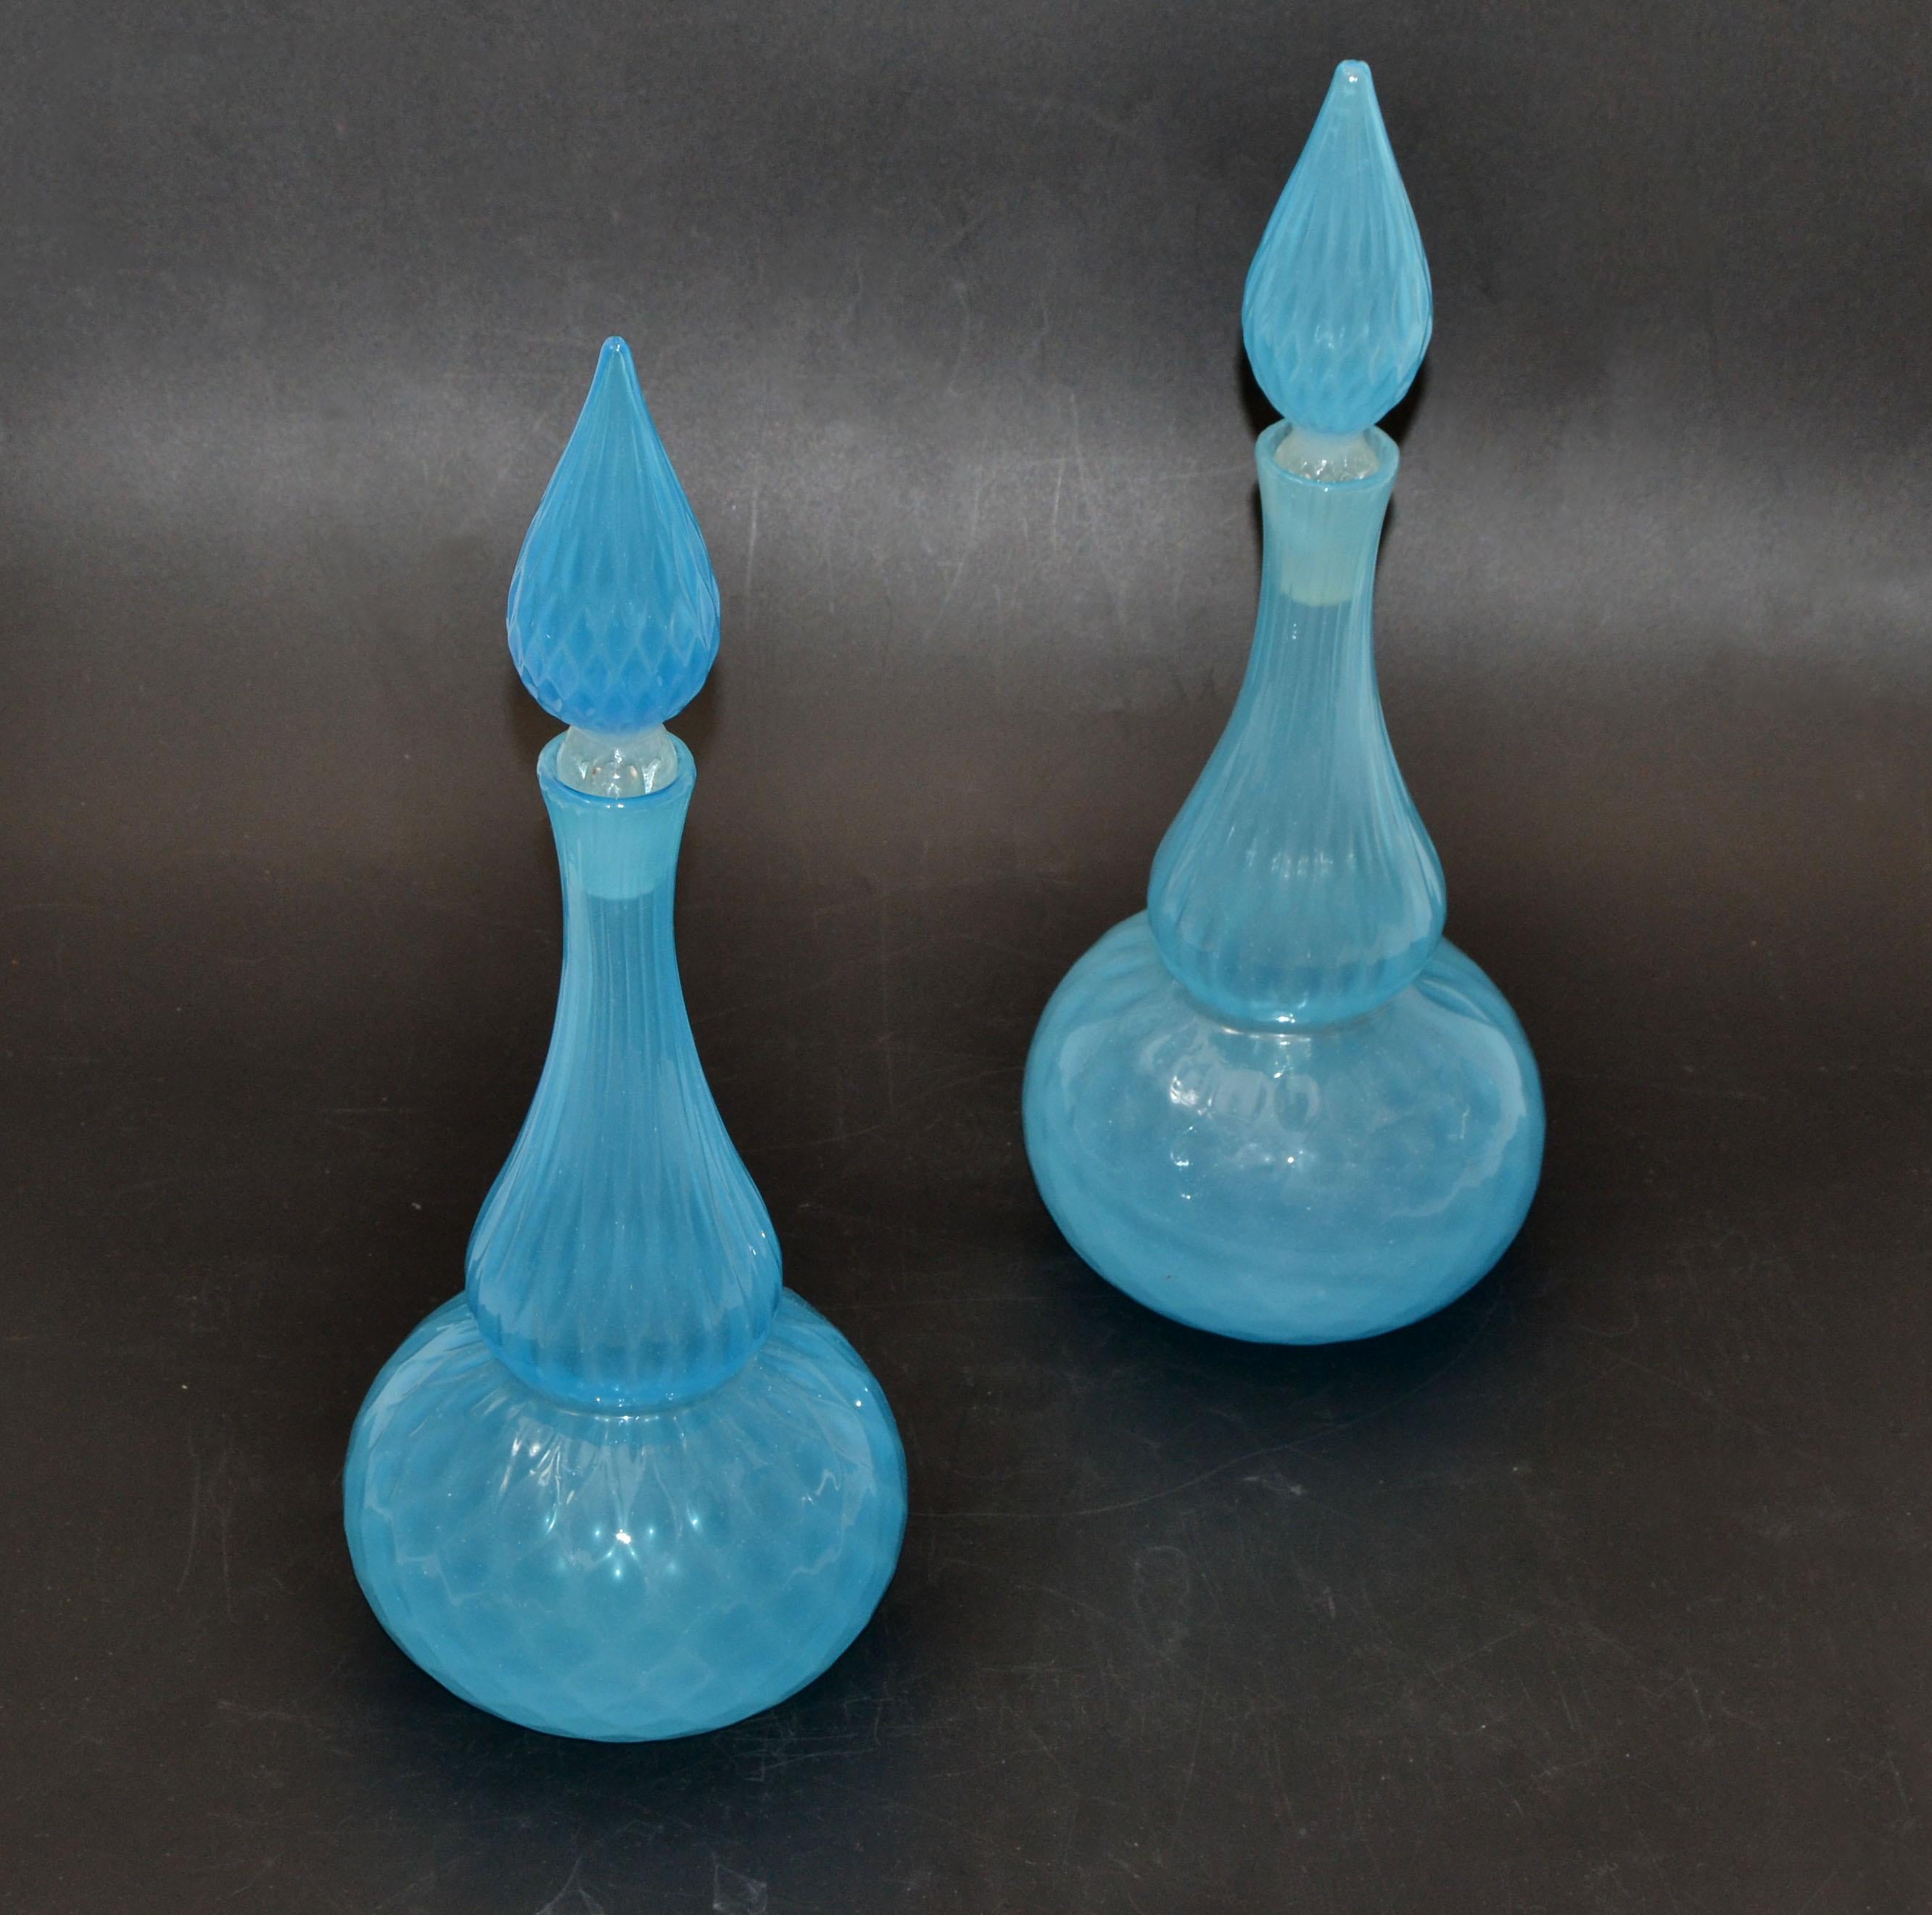 Barbini Murano Faceted Light Blue Art Glass Vessel Decanter With Stopper, Pair For Sale 7